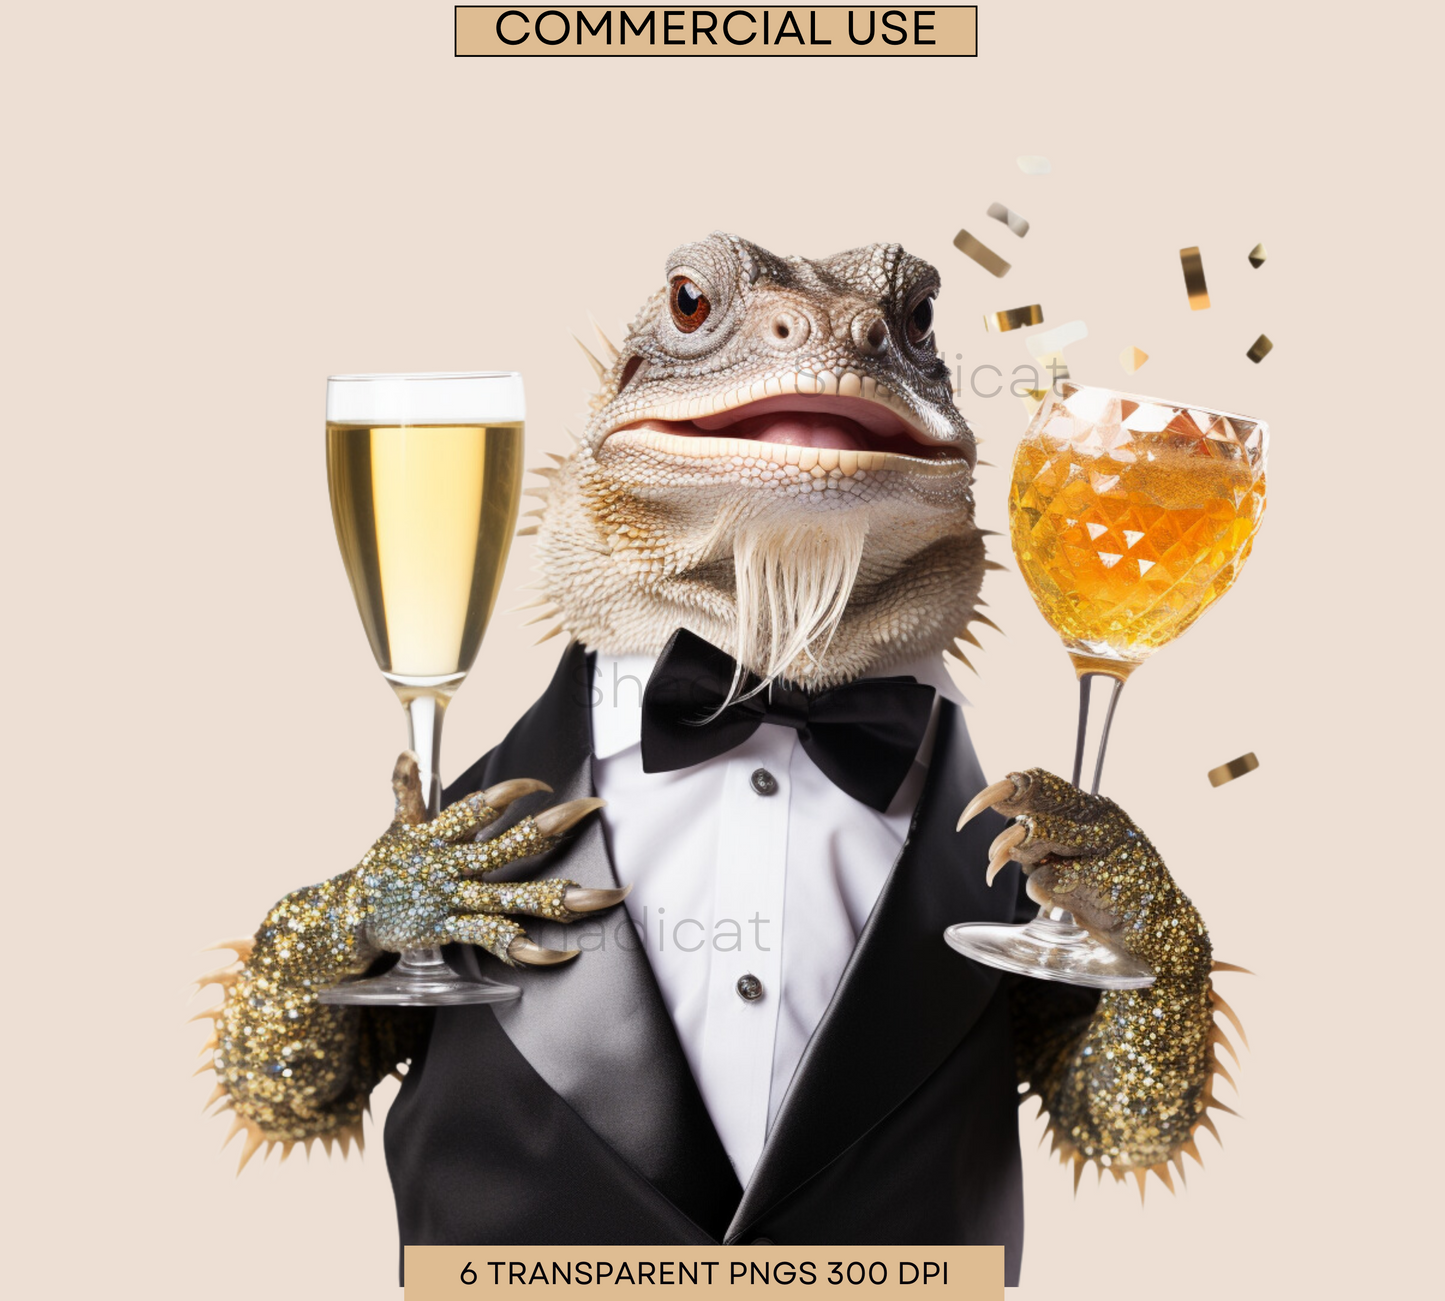 Bearded Dragon New Years, Clipart, Commercial Use, Card Making, Cute Beardie, Transparent PNGs, Cute Animal, New Year's Party Invitation